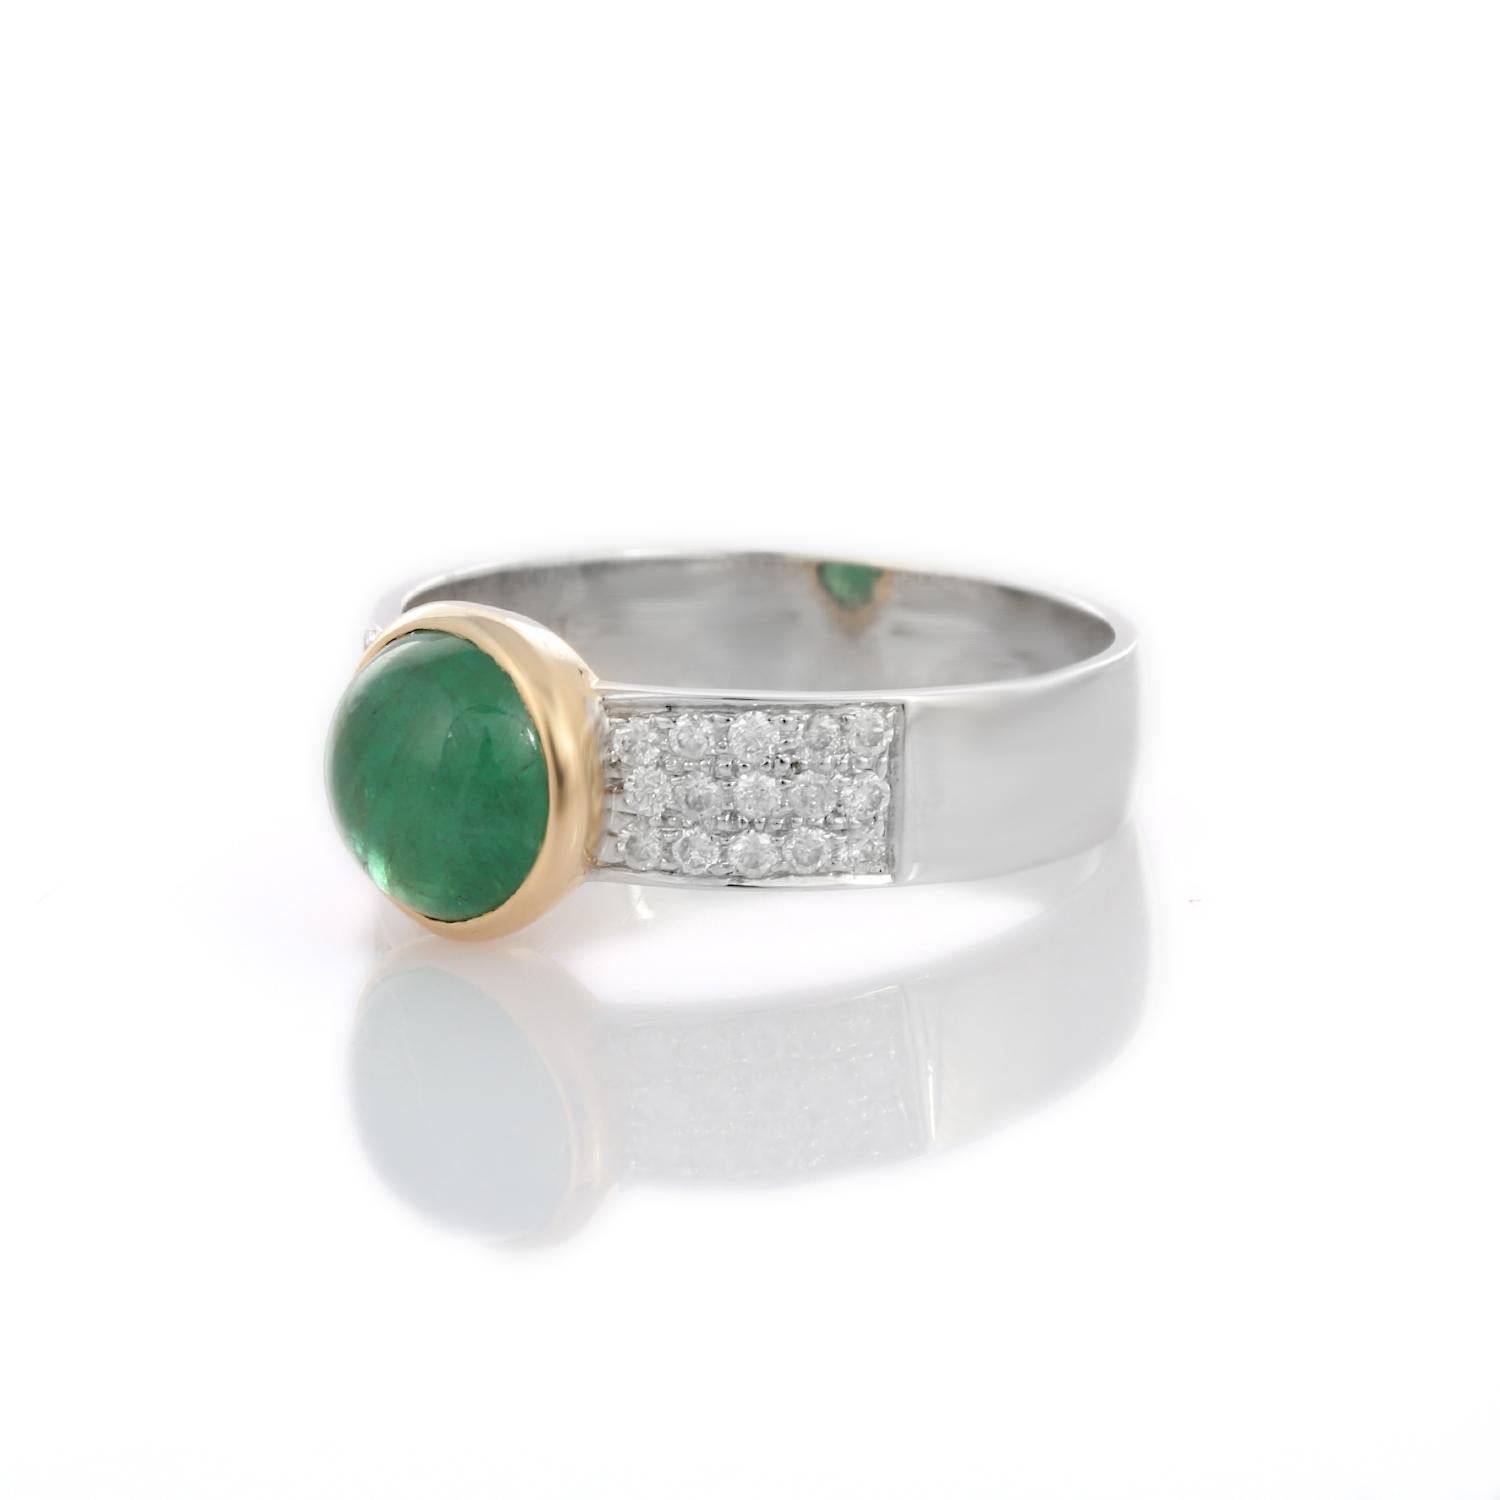 For Sale:  1.72 Carat Emerald and Diamond Ring in 18K White Gold  3